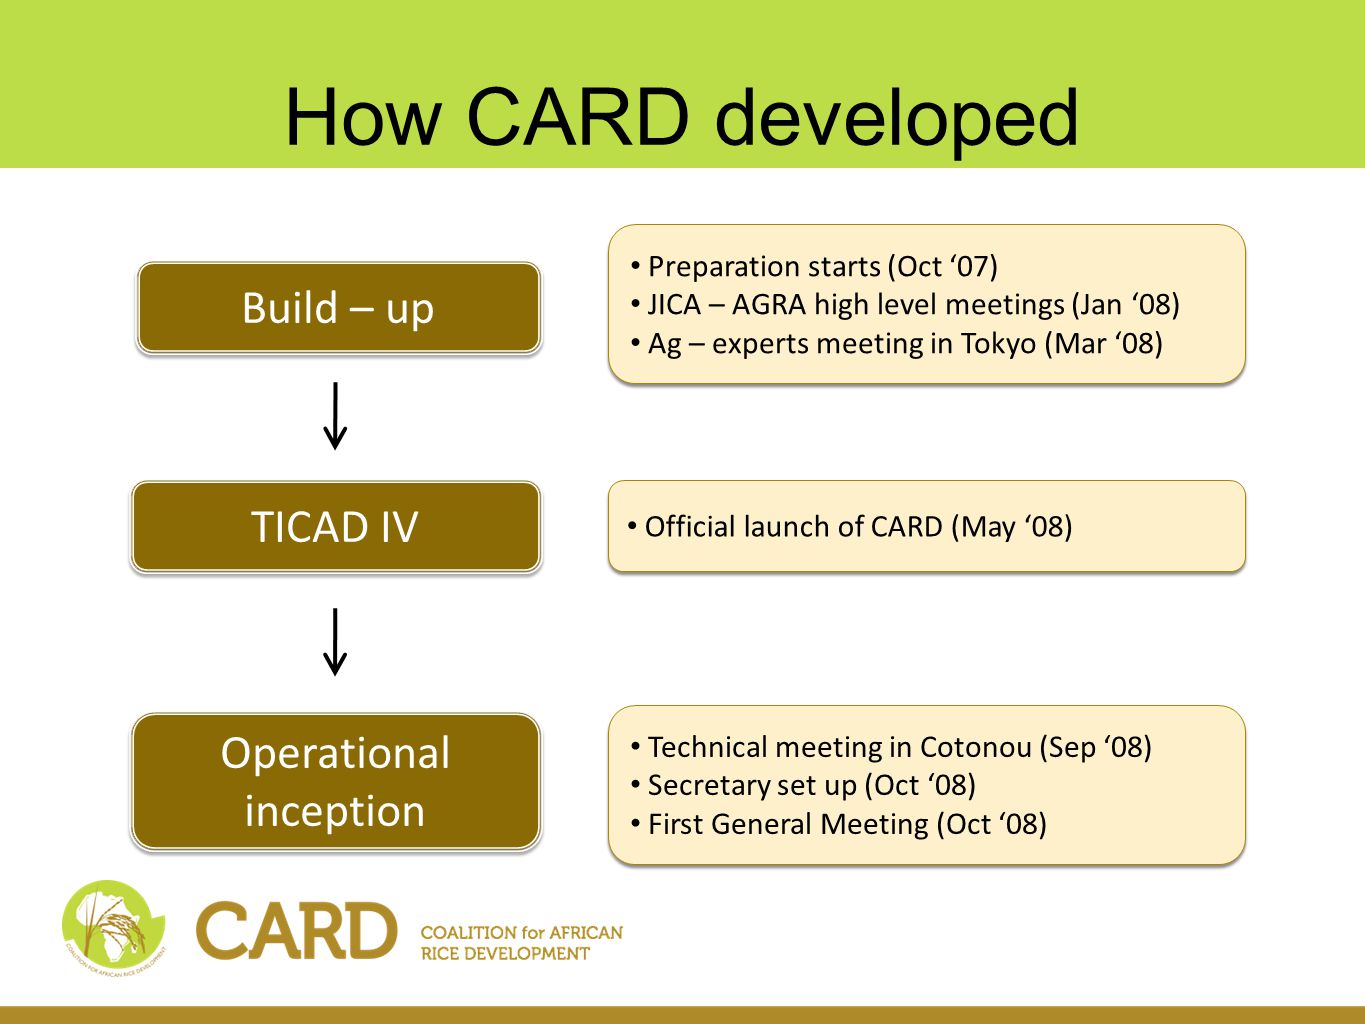 How CARD developed Build – up TICAD IV Preparation starts (Oct 07) JICA – AGRA high level meetings (Jan 08) Ag – experts meeting in Tokyo (Mar 08) Preparation starts (Oct 07) JICA – AGRA high level meetings (Jan 08) Ag – experts meeting in Tokyo (Mar 08) Operational inception Official launch of CARD (May 08) Technical meeting in Cotonou (Sep 08) Secretary set up (Oct 08) First General Meeting (Oct 08) Technical meeting in Cotonou (Sep 08) Secretary set up (Oct 08) First General Meeting (Oct 08)